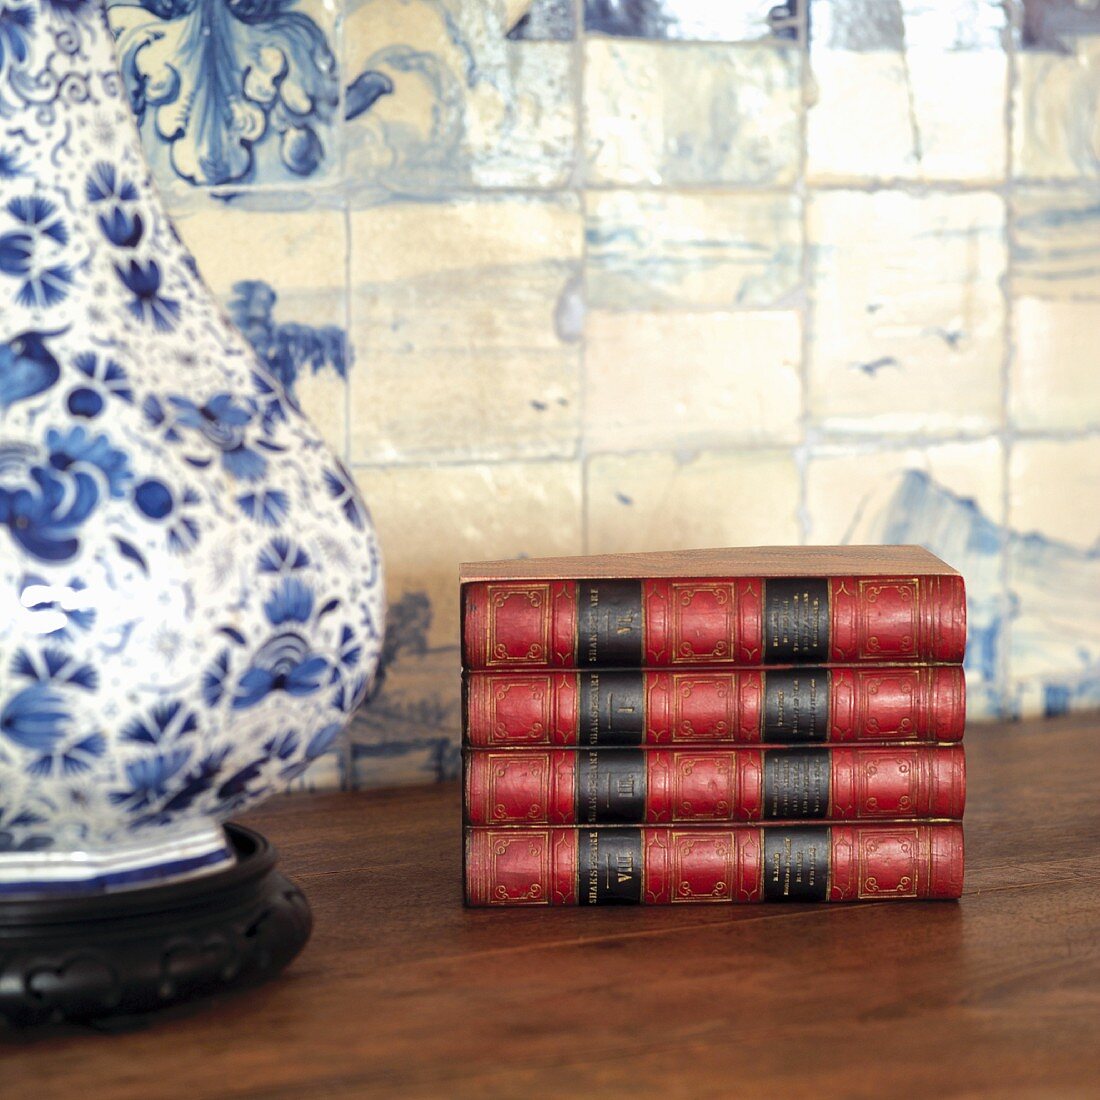 Antique books on table next to table lamp with white and blue ceramic base